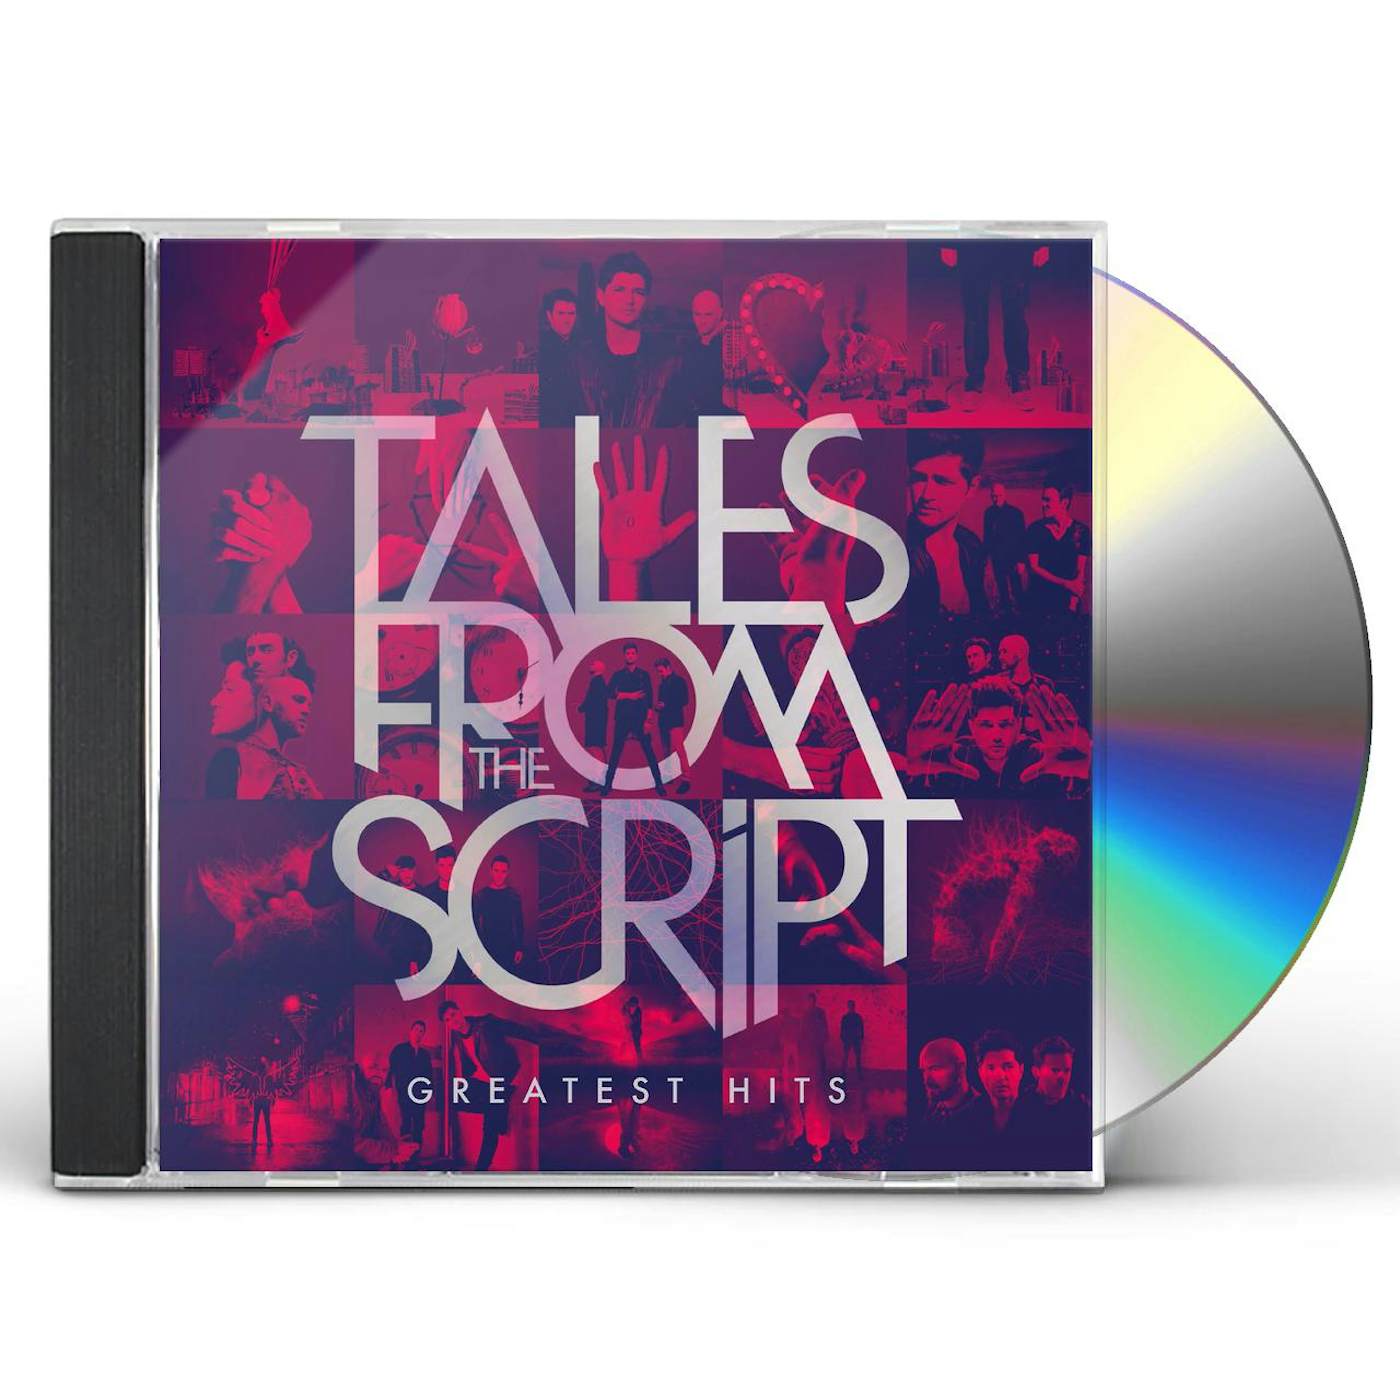 TALES FROM THE SCRIPT - GREATEST HITS CD